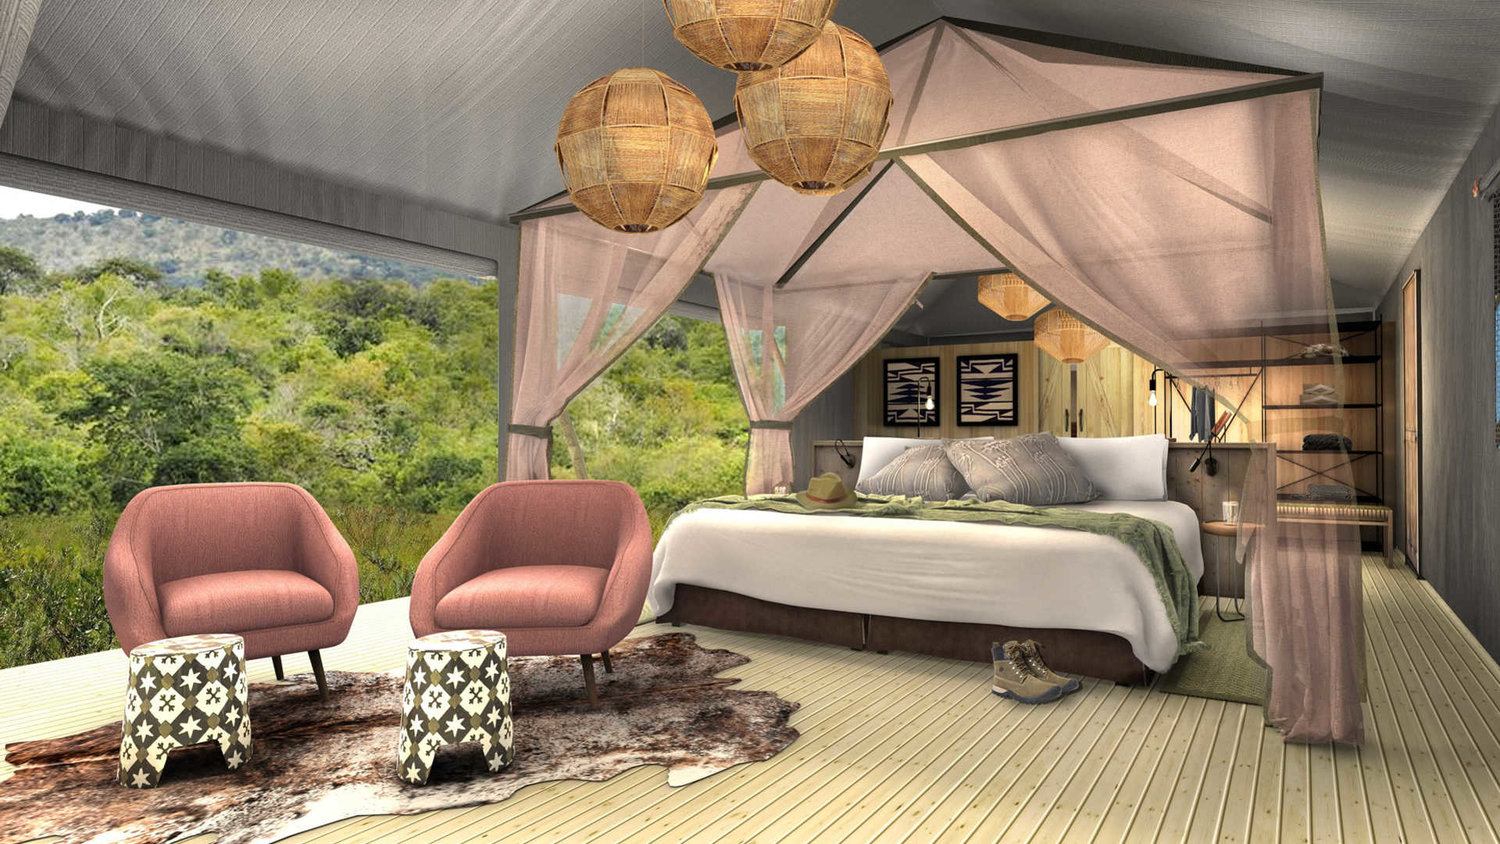 Photo: Magashi Camp tent rendering, courtesy of Wilderness Safaris.